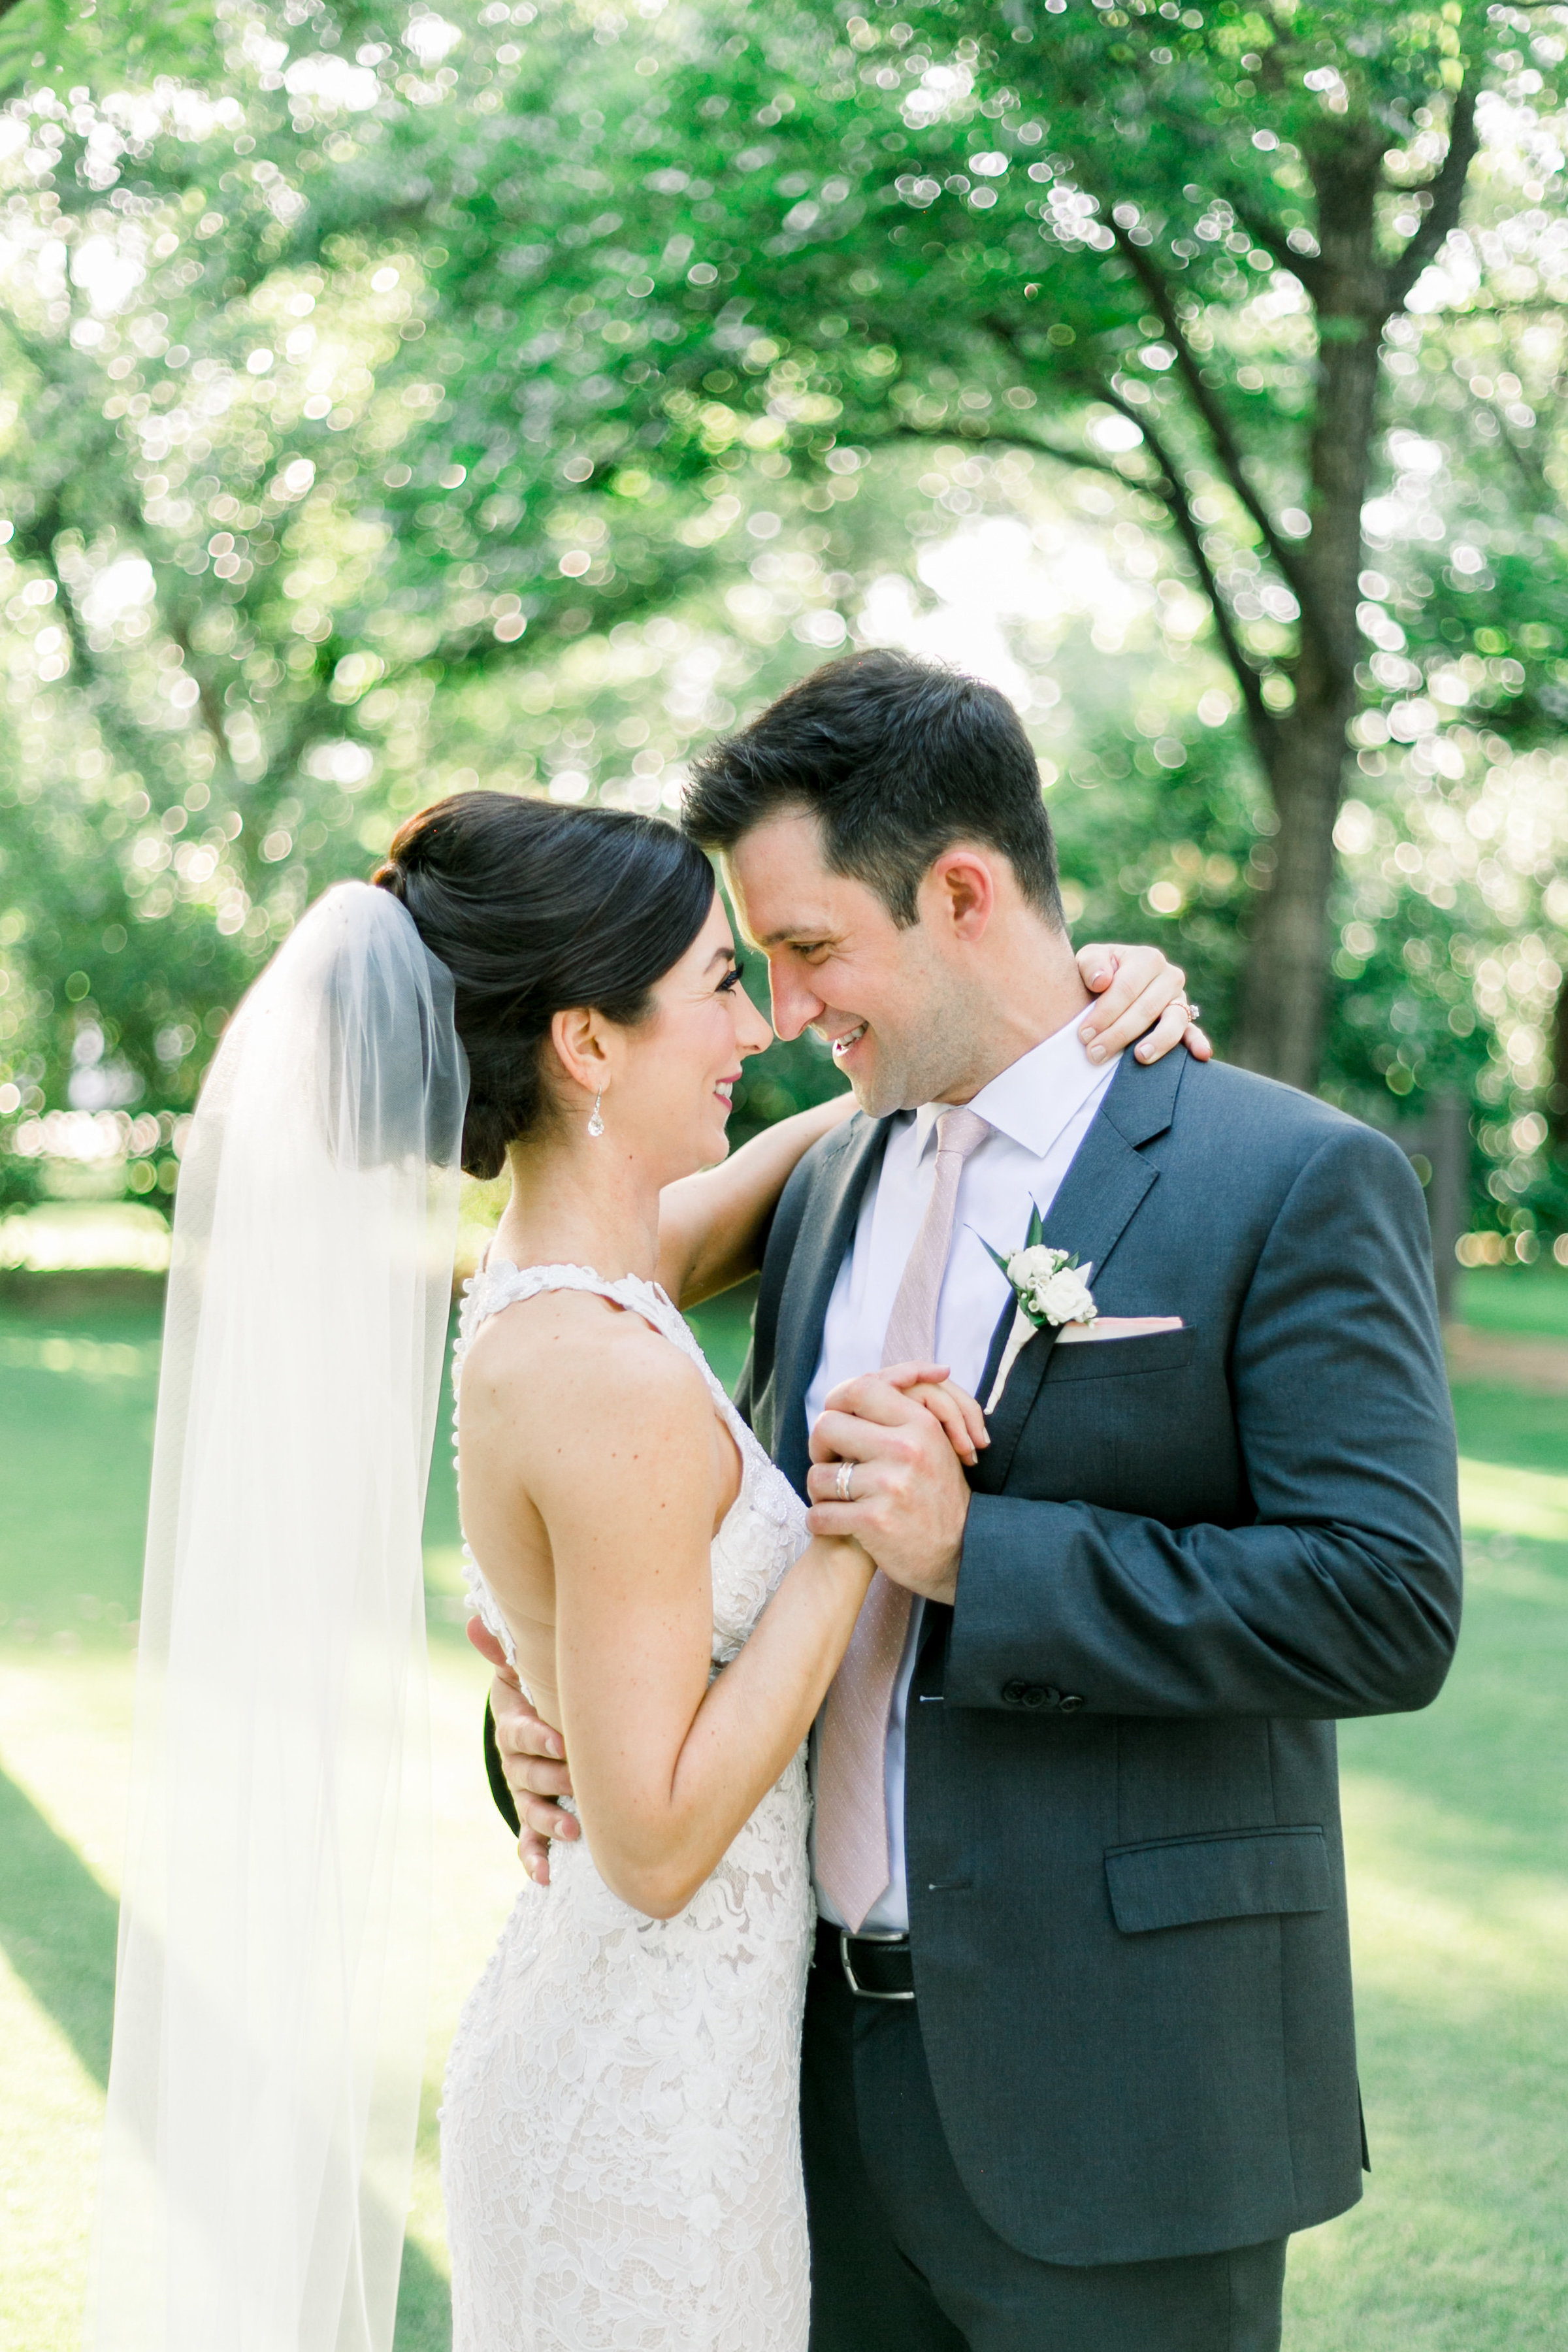 Karlie Colleen Photography - Venue At The Grove - Arizona Wedding - Maggie & Grant -75